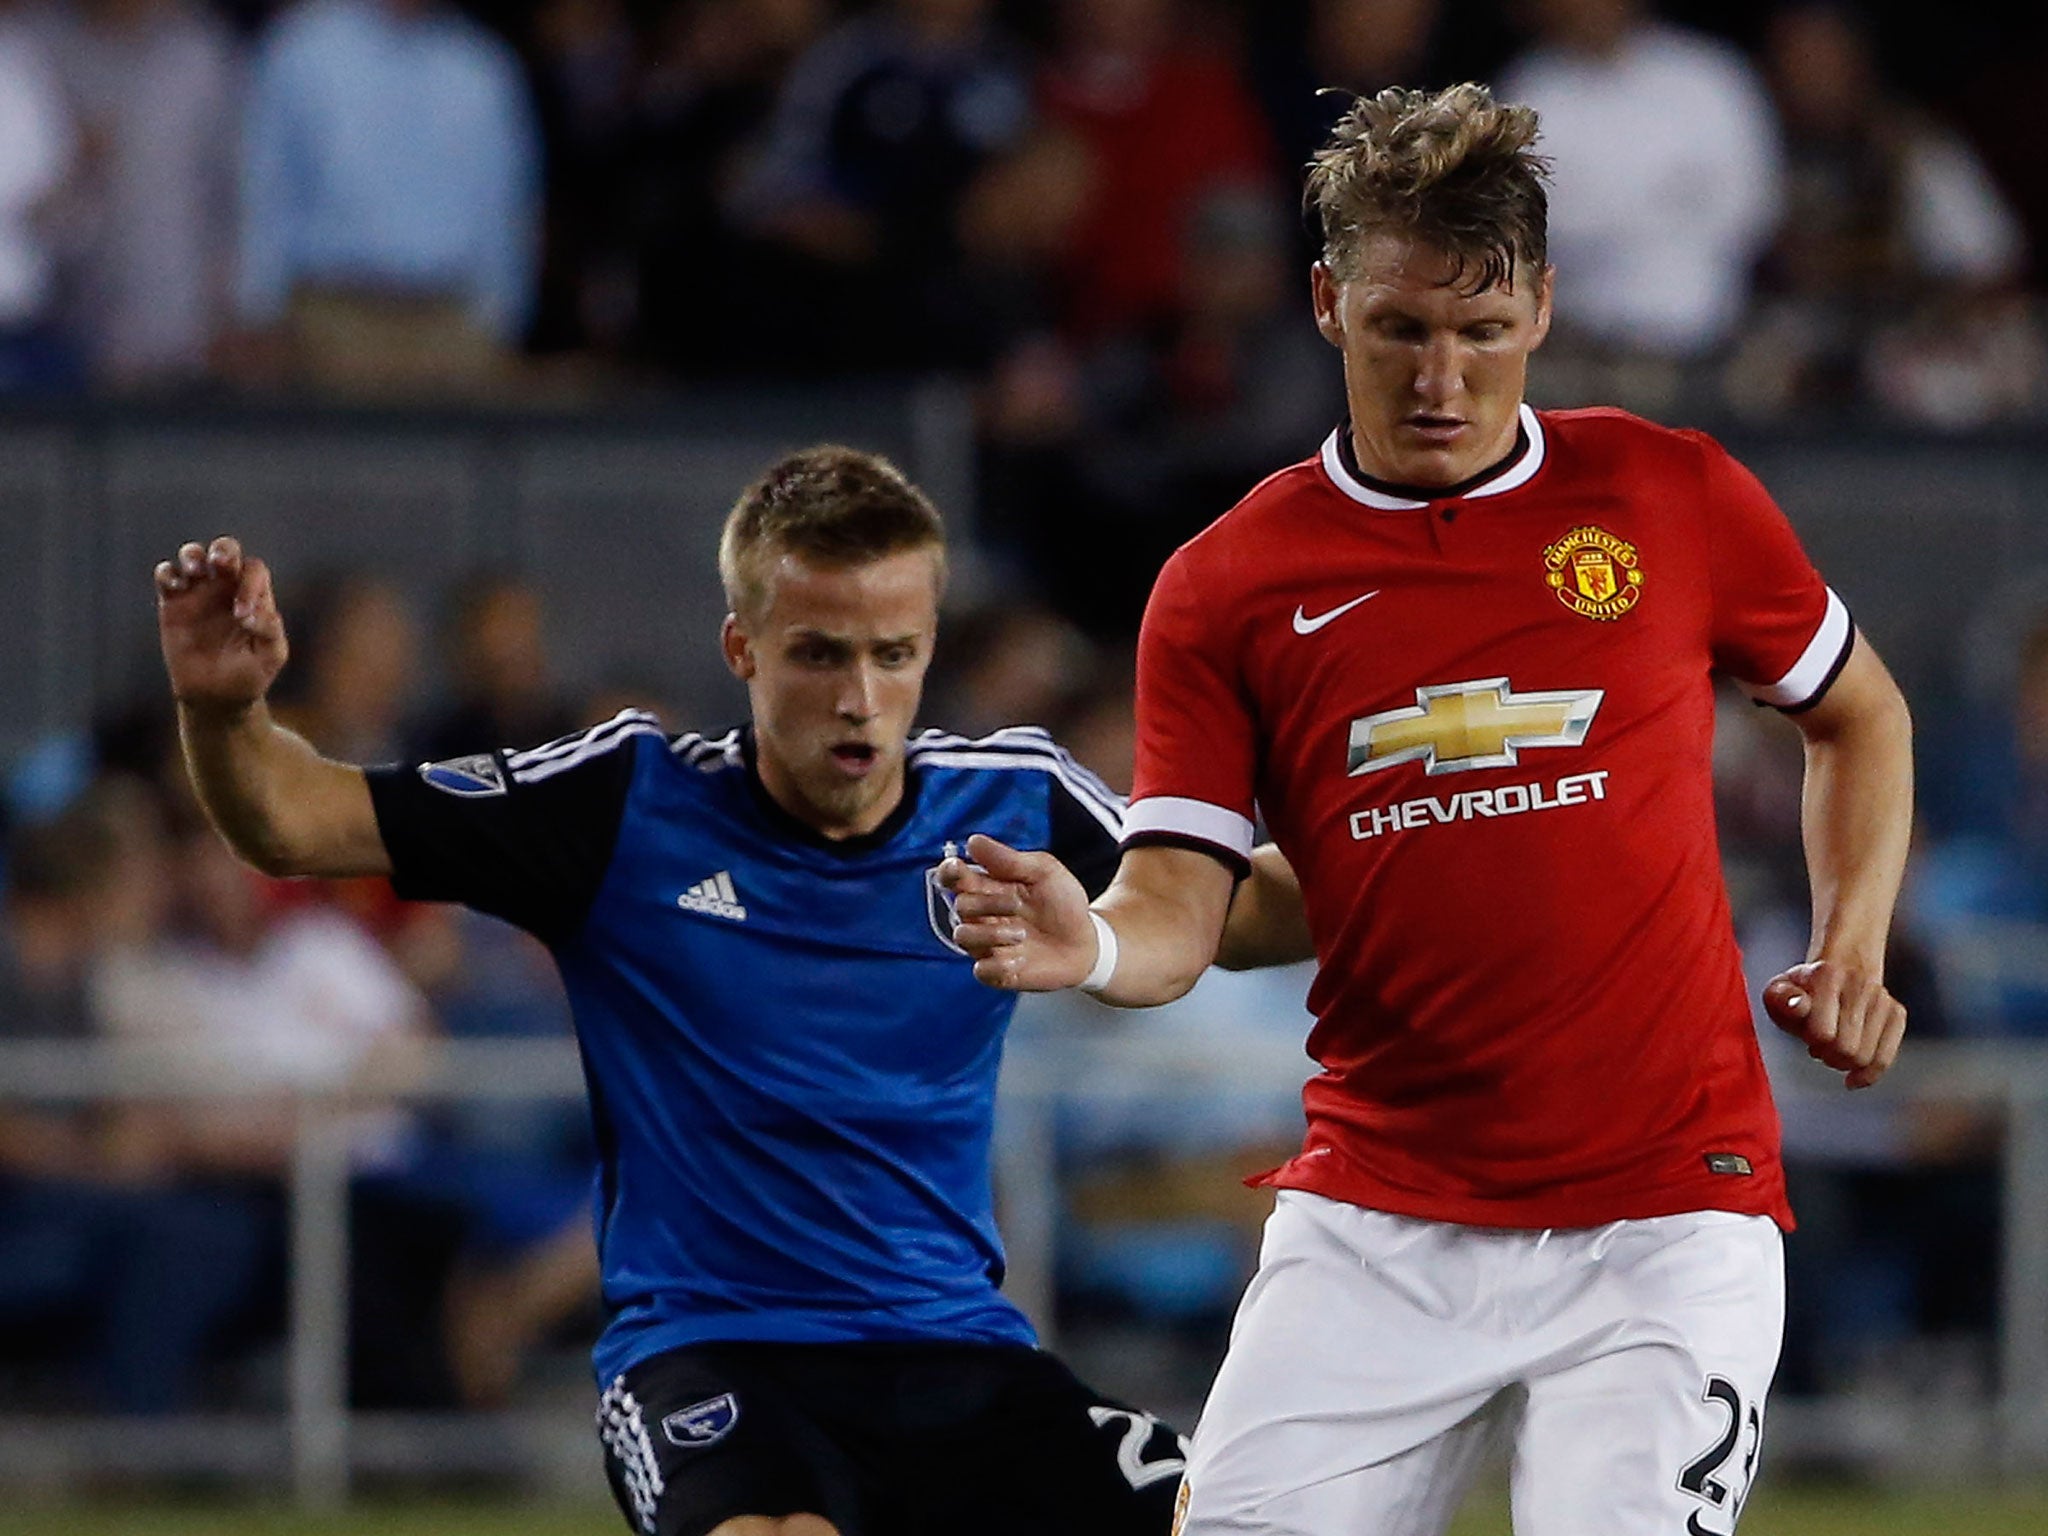 Bastian Schweinsteiger was slated for his Manchester United performance